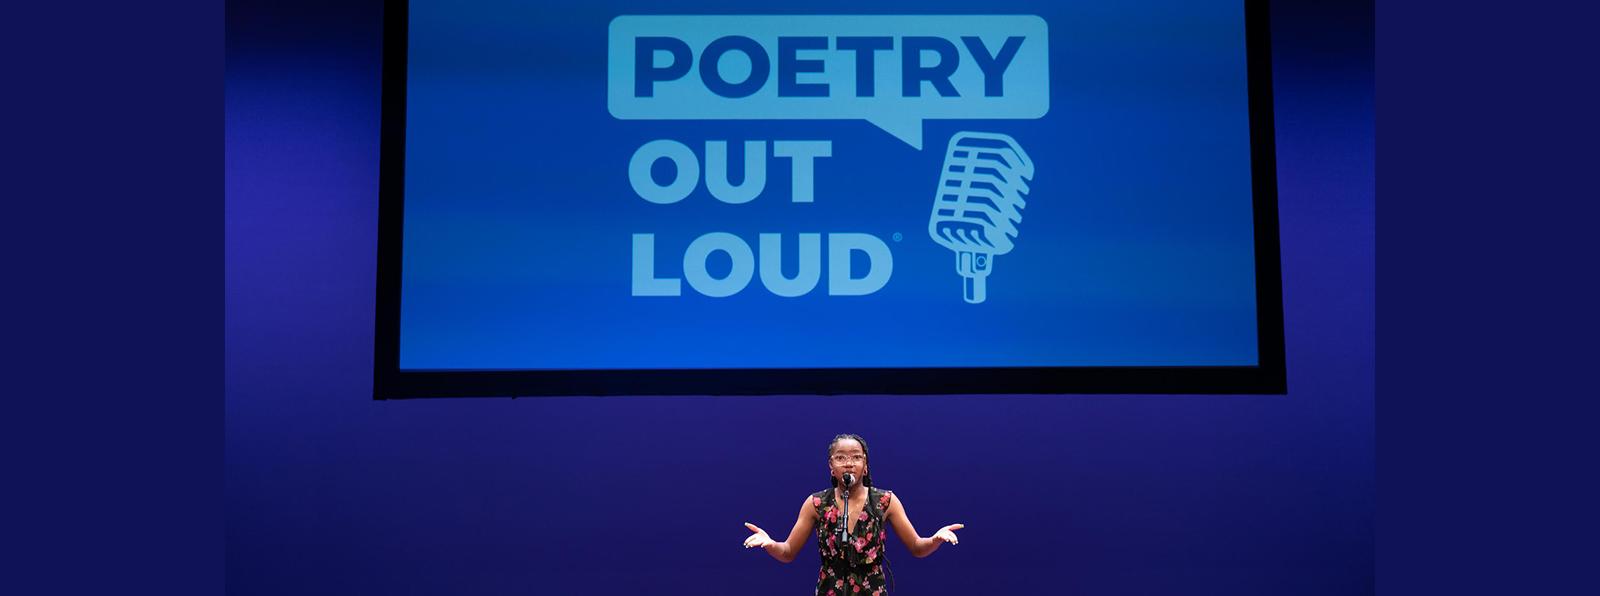 A young woman expressively performing onstage beneath a large, projected image of the Poetry Out Loud logo.